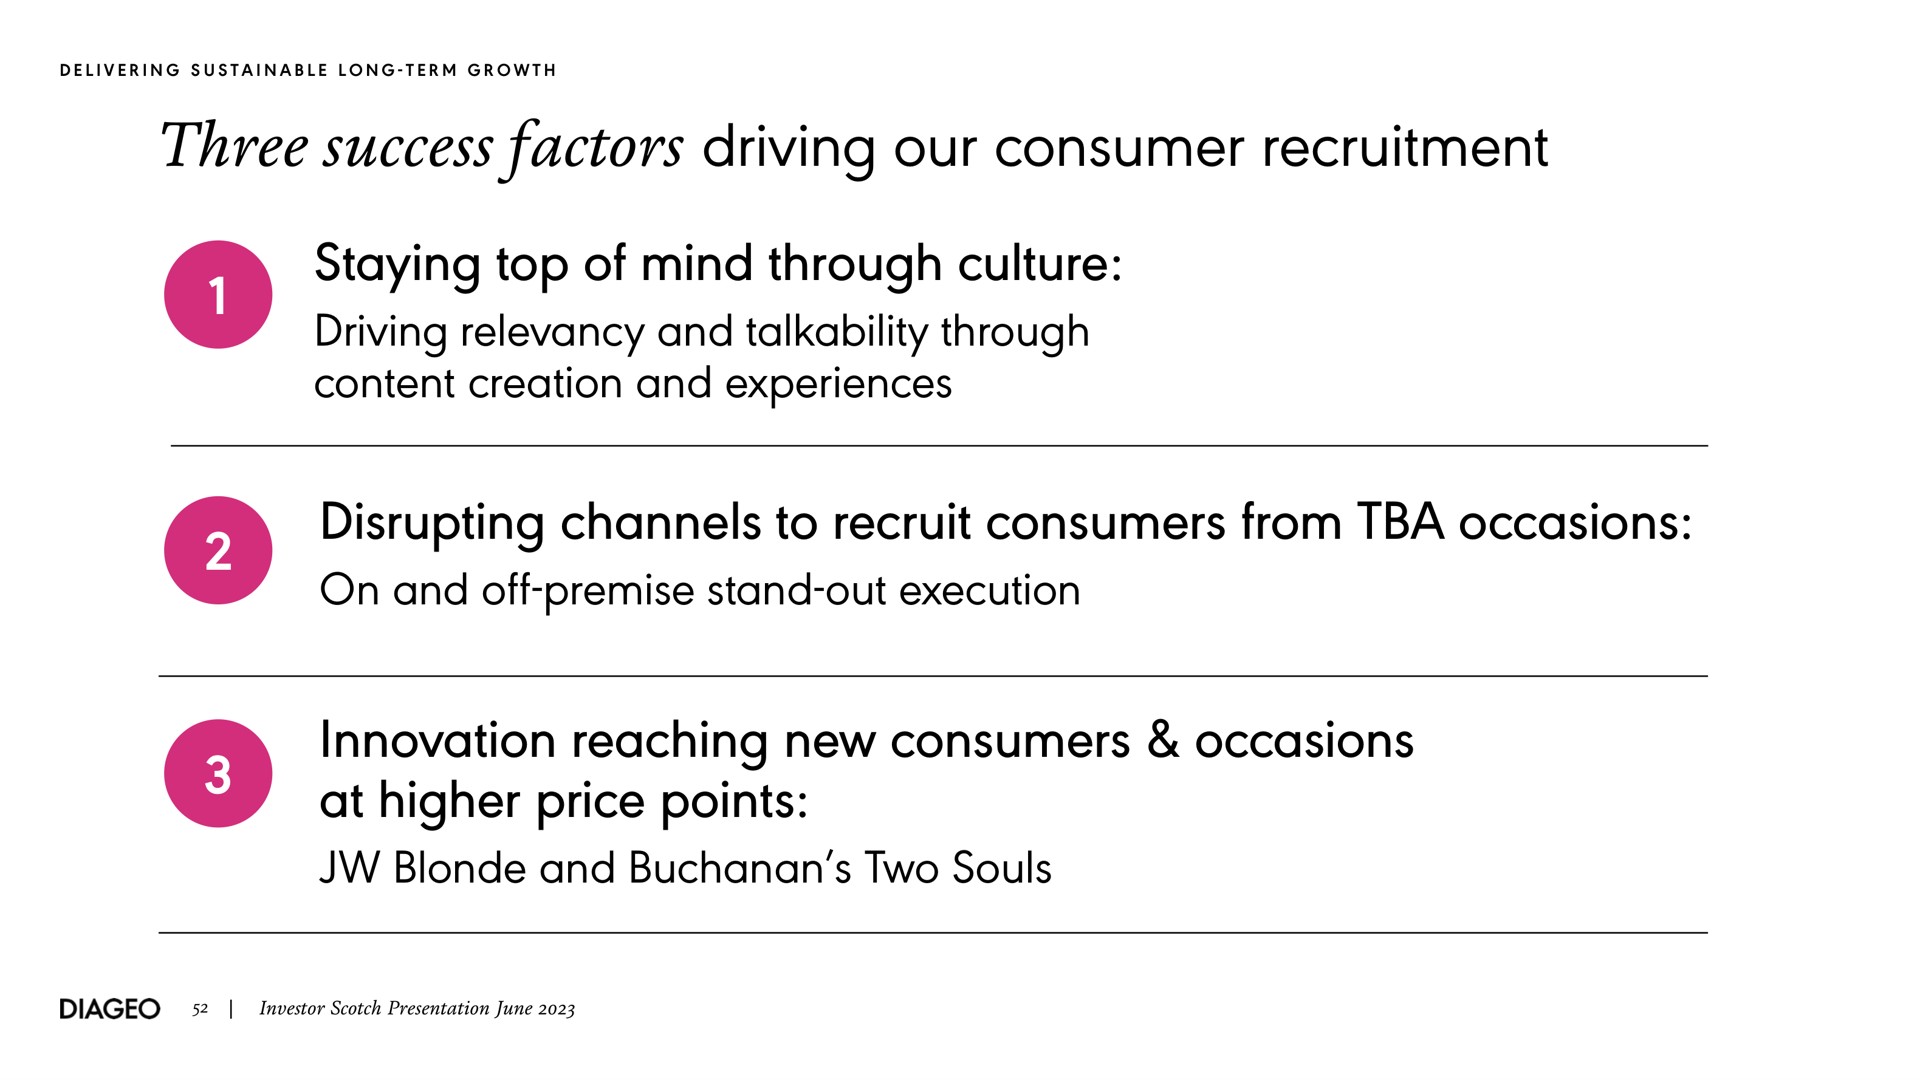 three success factors driving our consumer recruitment staying top of mind through culture driving relevancy and talkability through content creation and experiences disrupting channels to recruit consumers from occasions on and off premise stand out execution innovation reaching new consumers occasions at higher price points blonde and two souls delivering sustainable long term growth investor scotch presentation june | Diageo